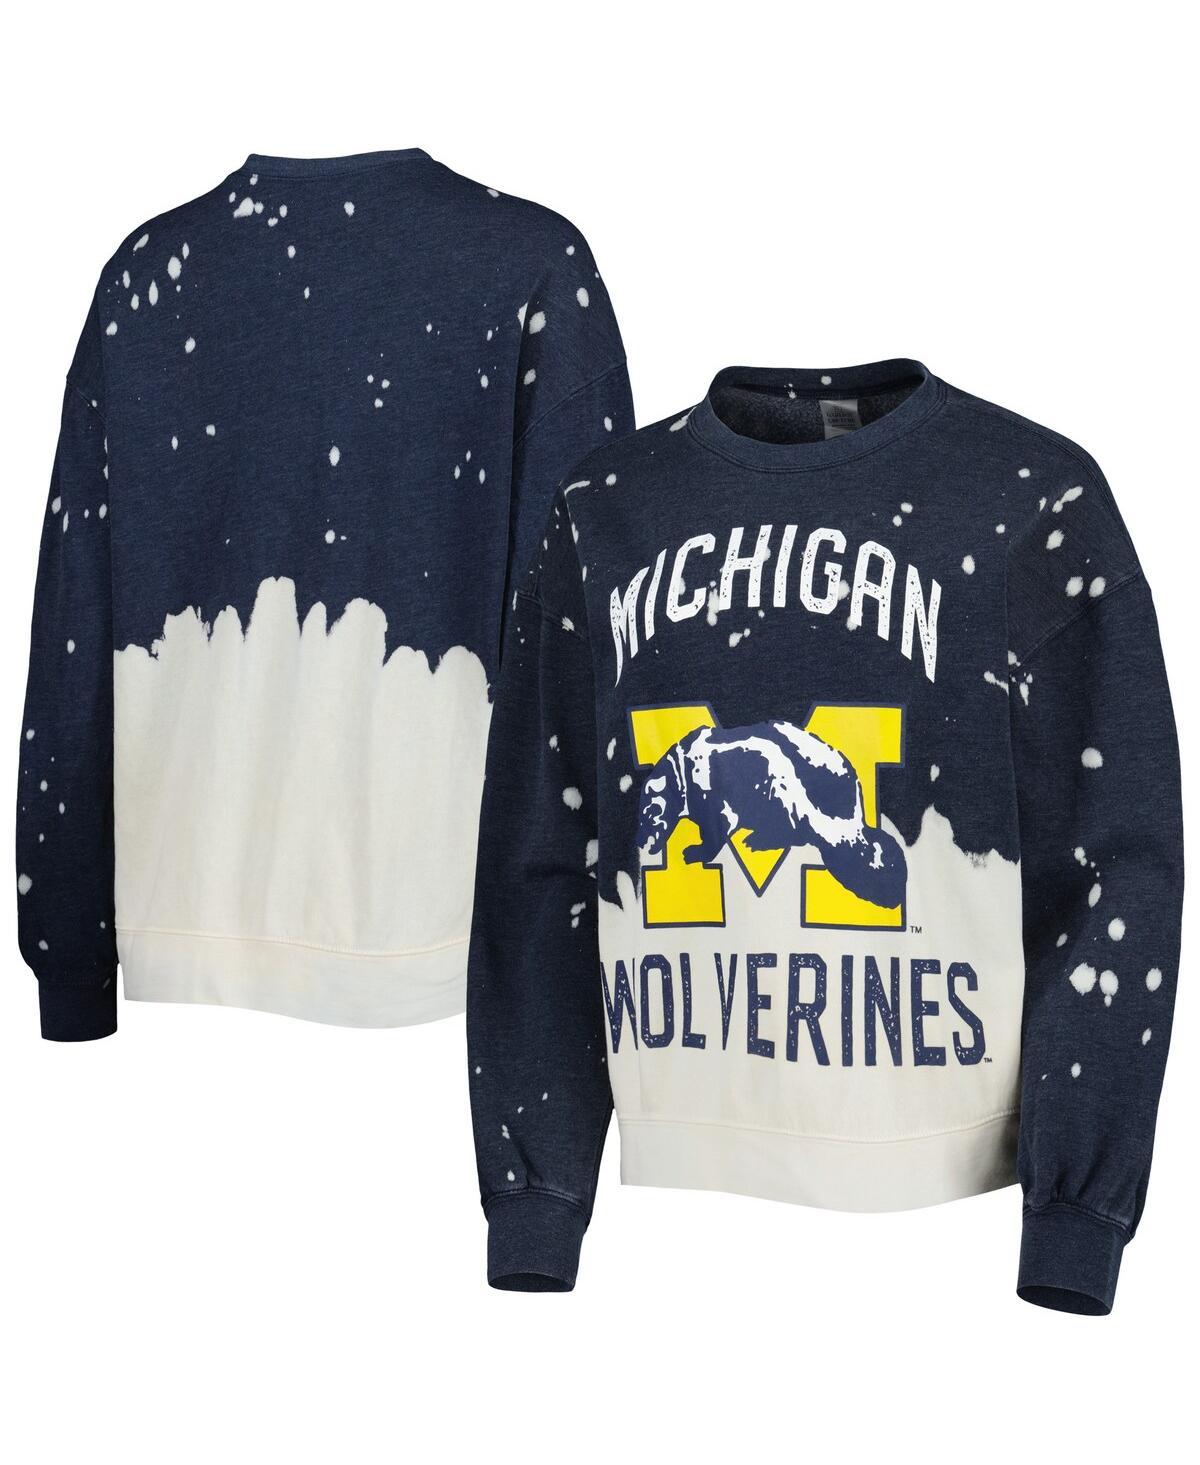 GAMEDAY COUTURE WOMEN'S GAMEDAY COUTURE NAVY MICHIGAN WOLVERINES TWICE AS NICE FADED DIP-DYE PULLOVER SWEATSHIRT